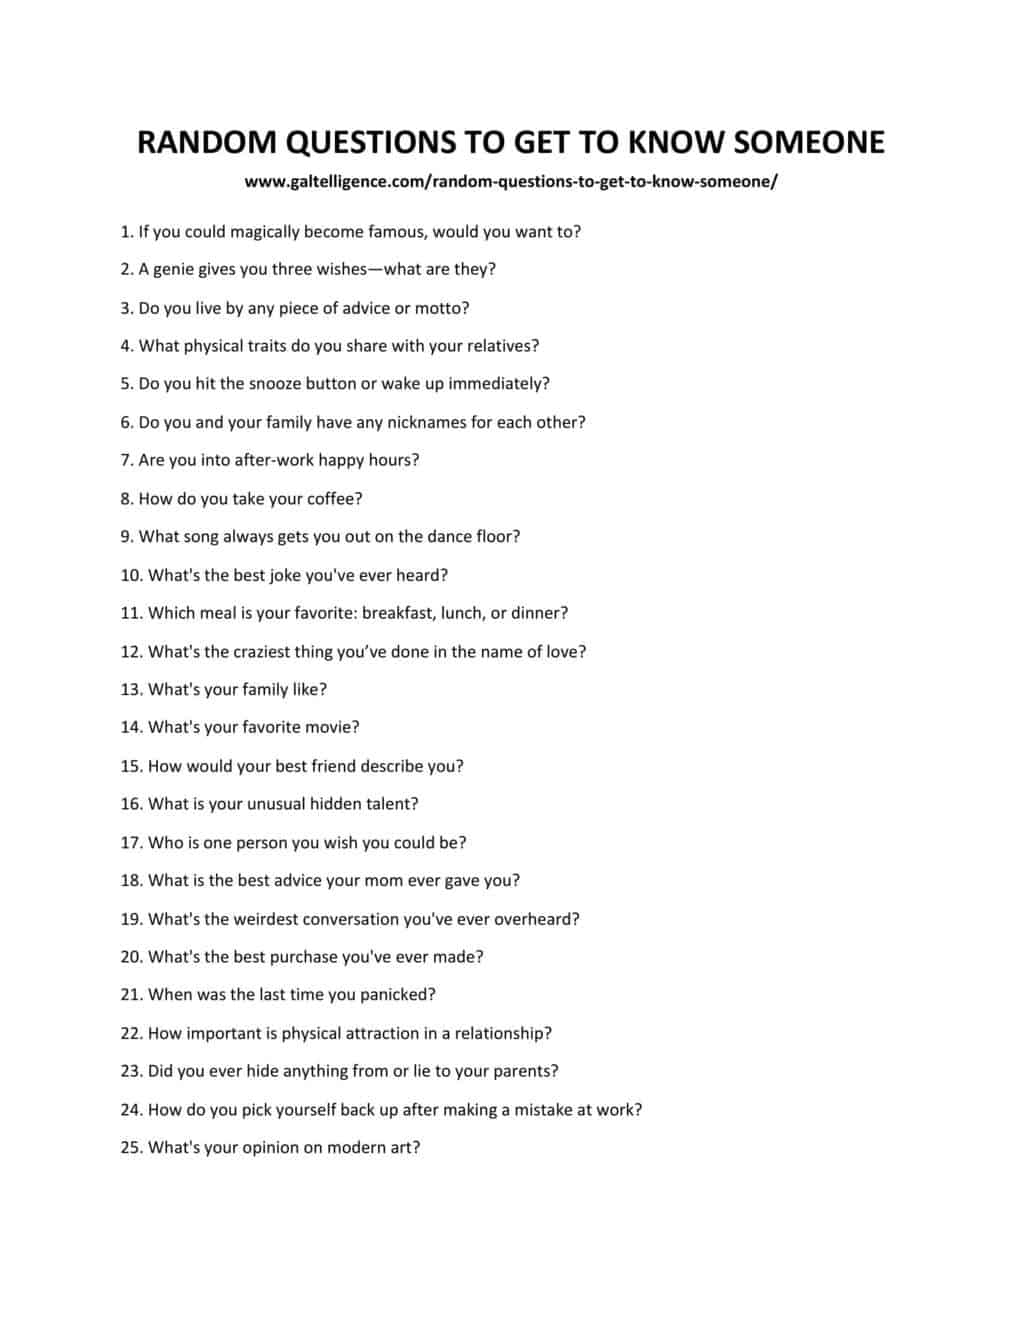 Downloadable list of questions